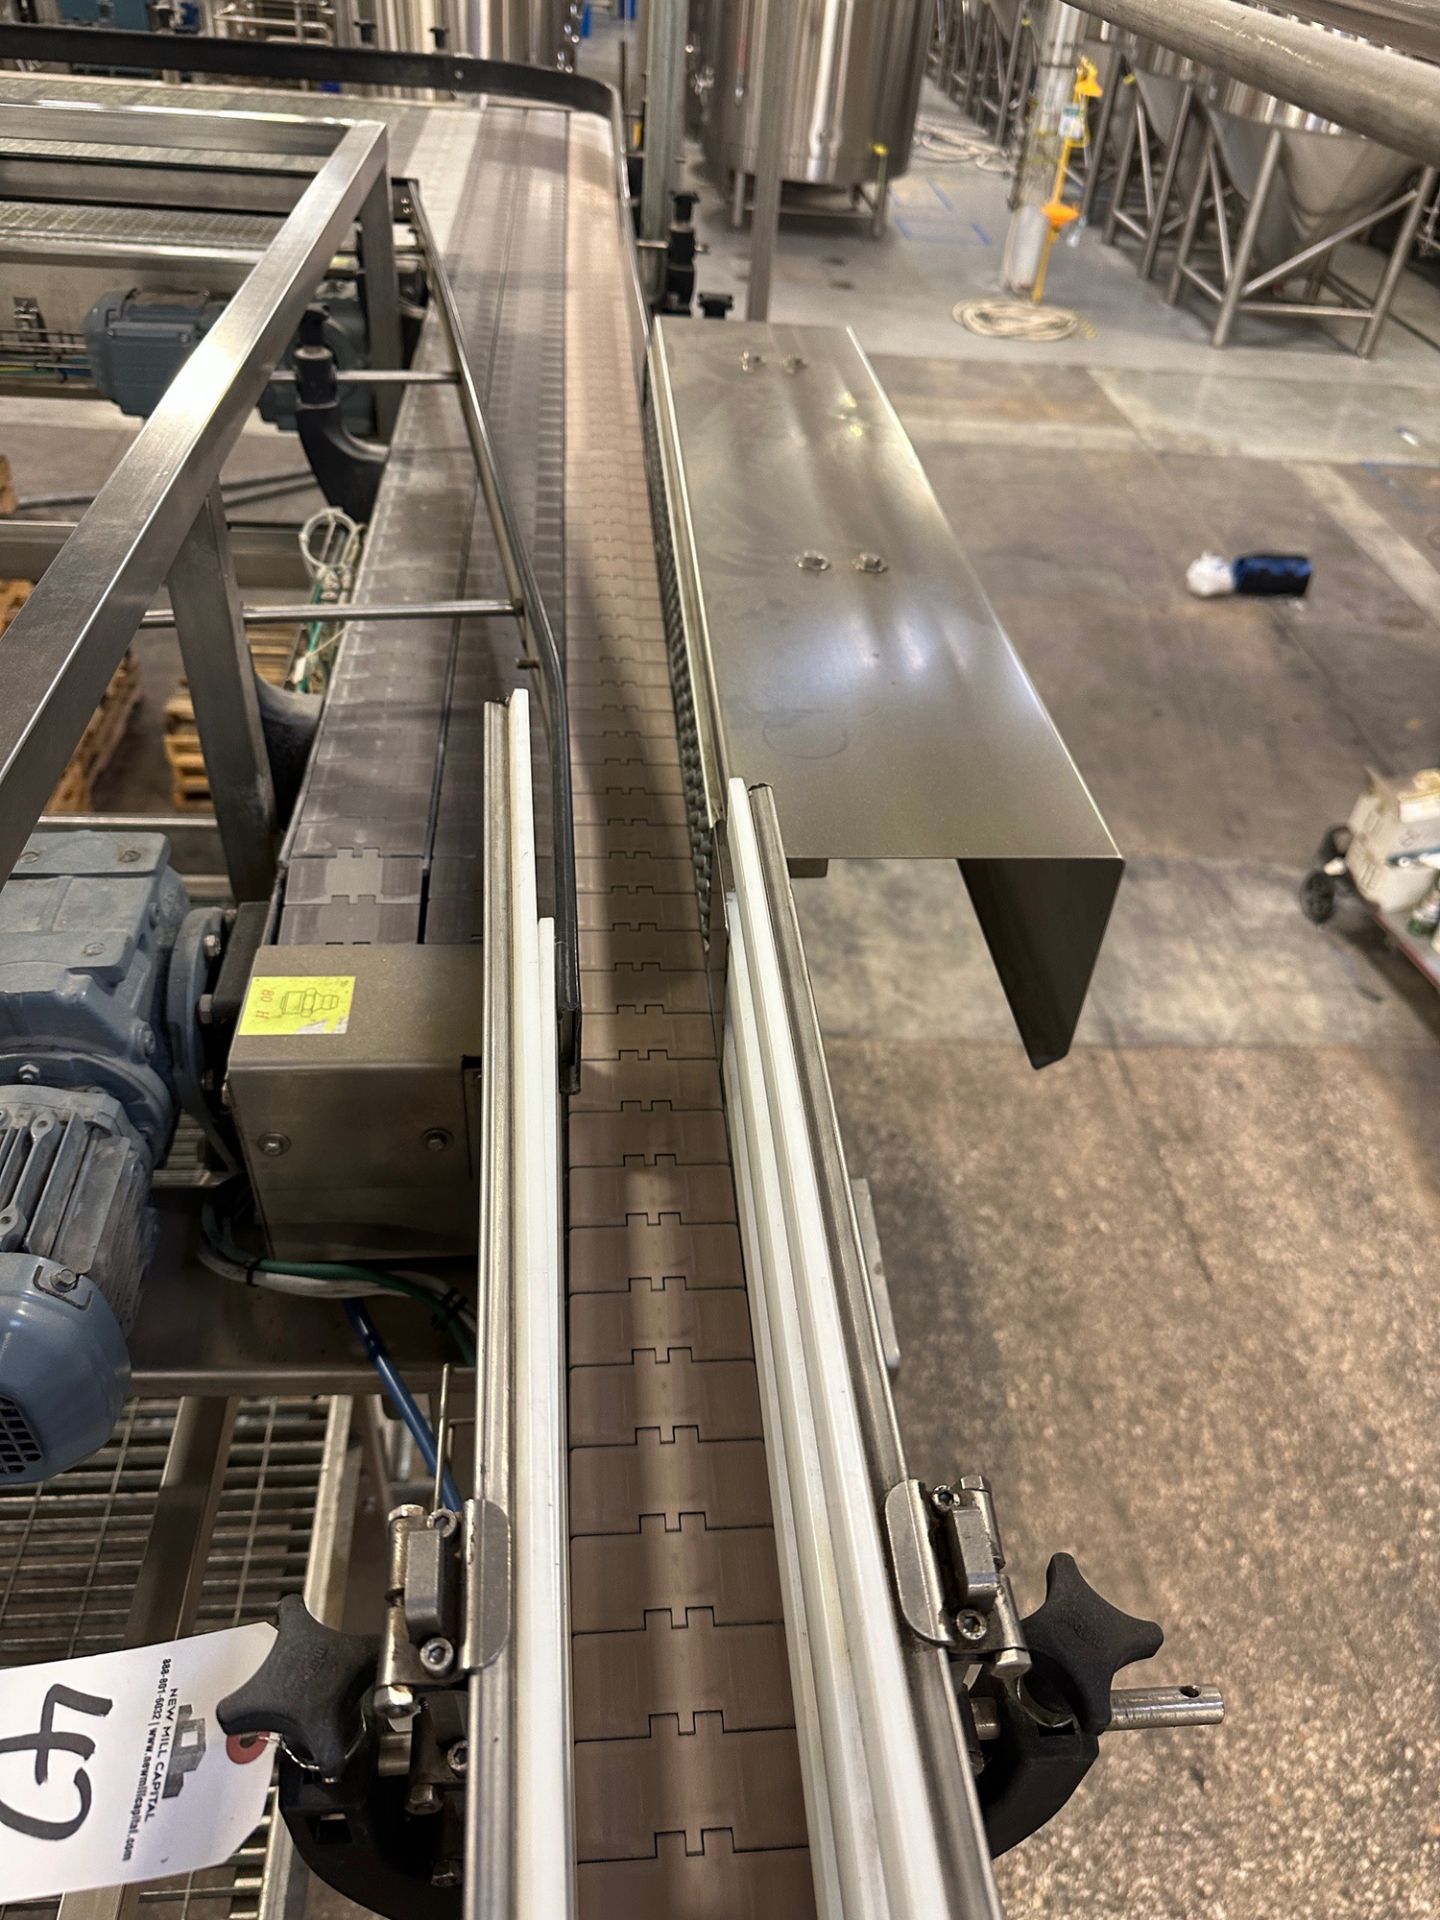 Comac Conveyor over Stainless Steel Frame from De-Pal to Spiral Rinser (Approx. 3.25" Belt x 35')